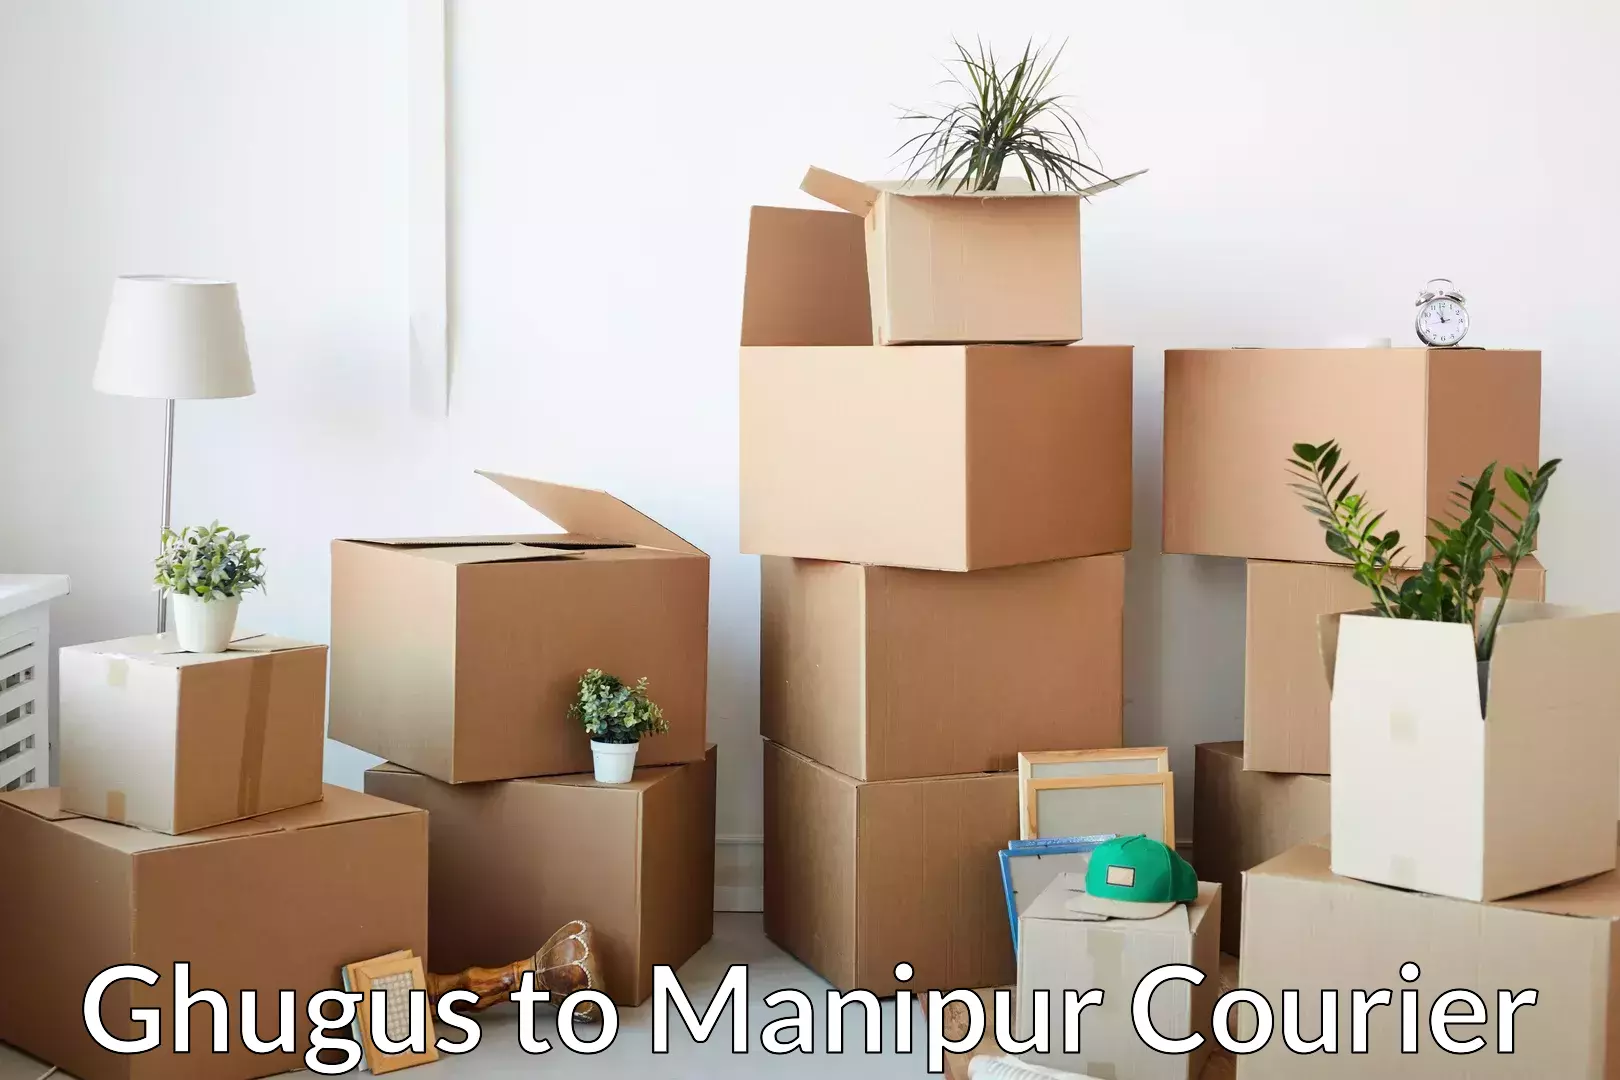 Household moving experts Ghugus to Manipur